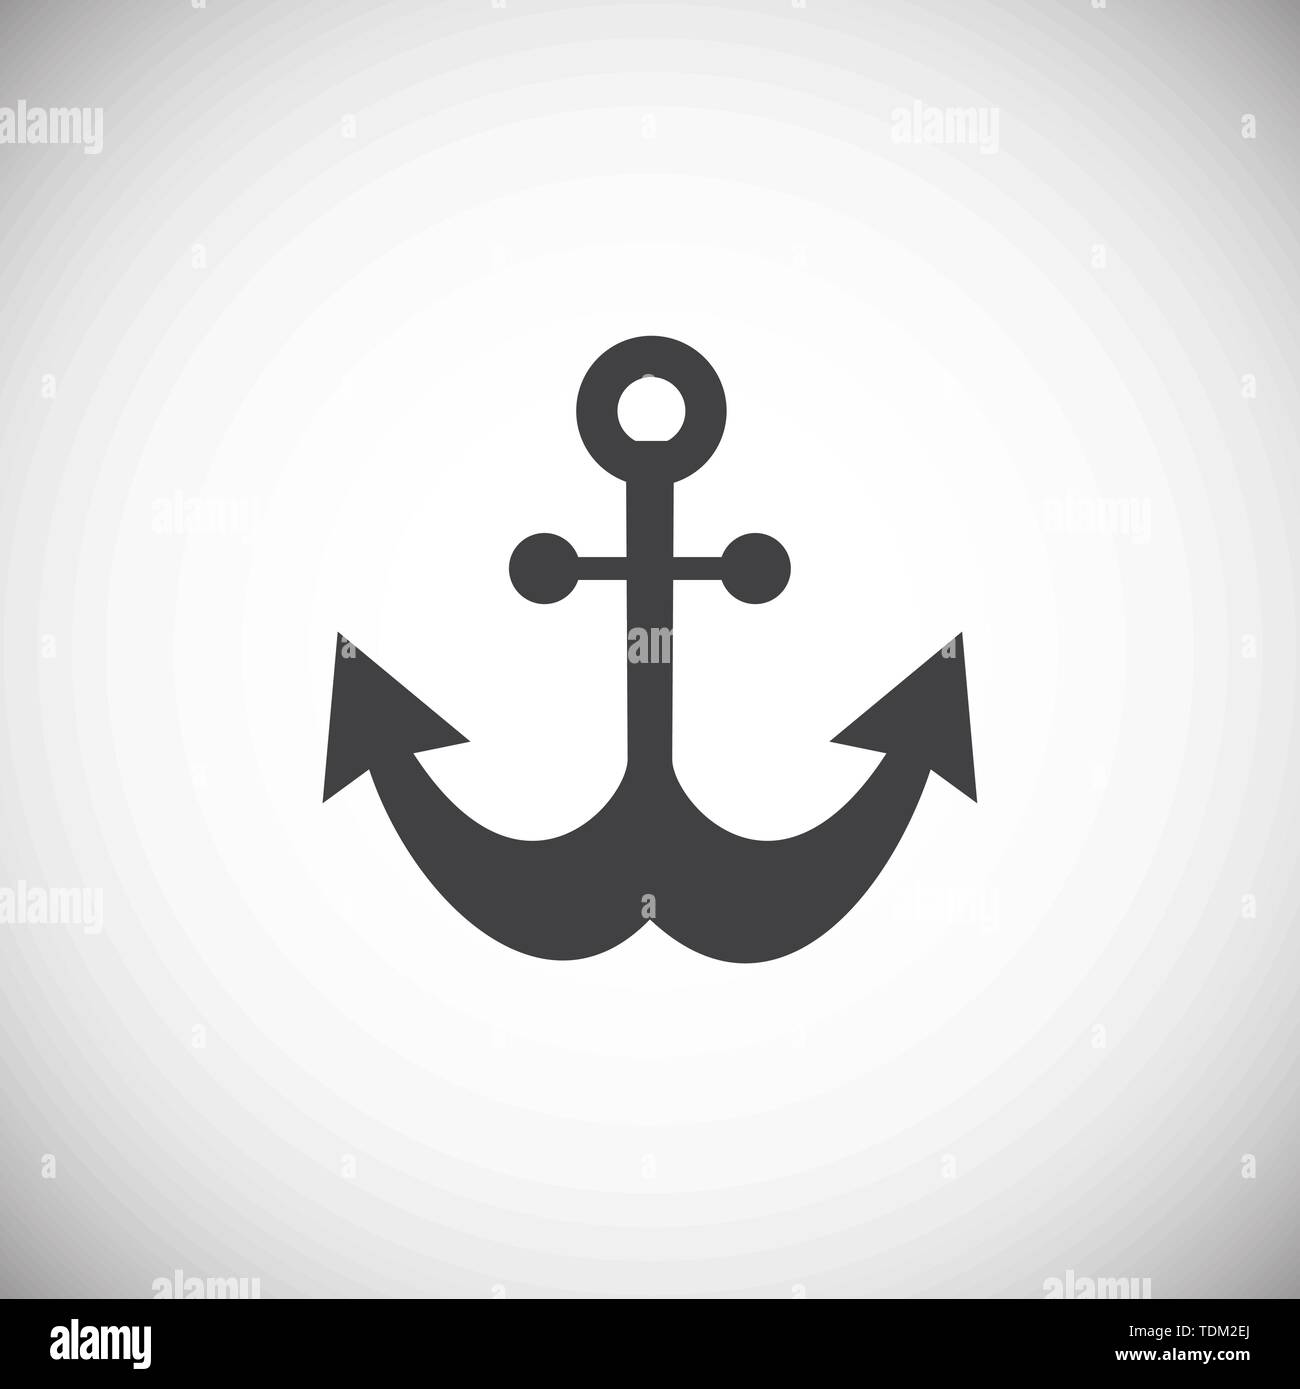 Anchor icon internet button on Stock Vector Images - Alamy